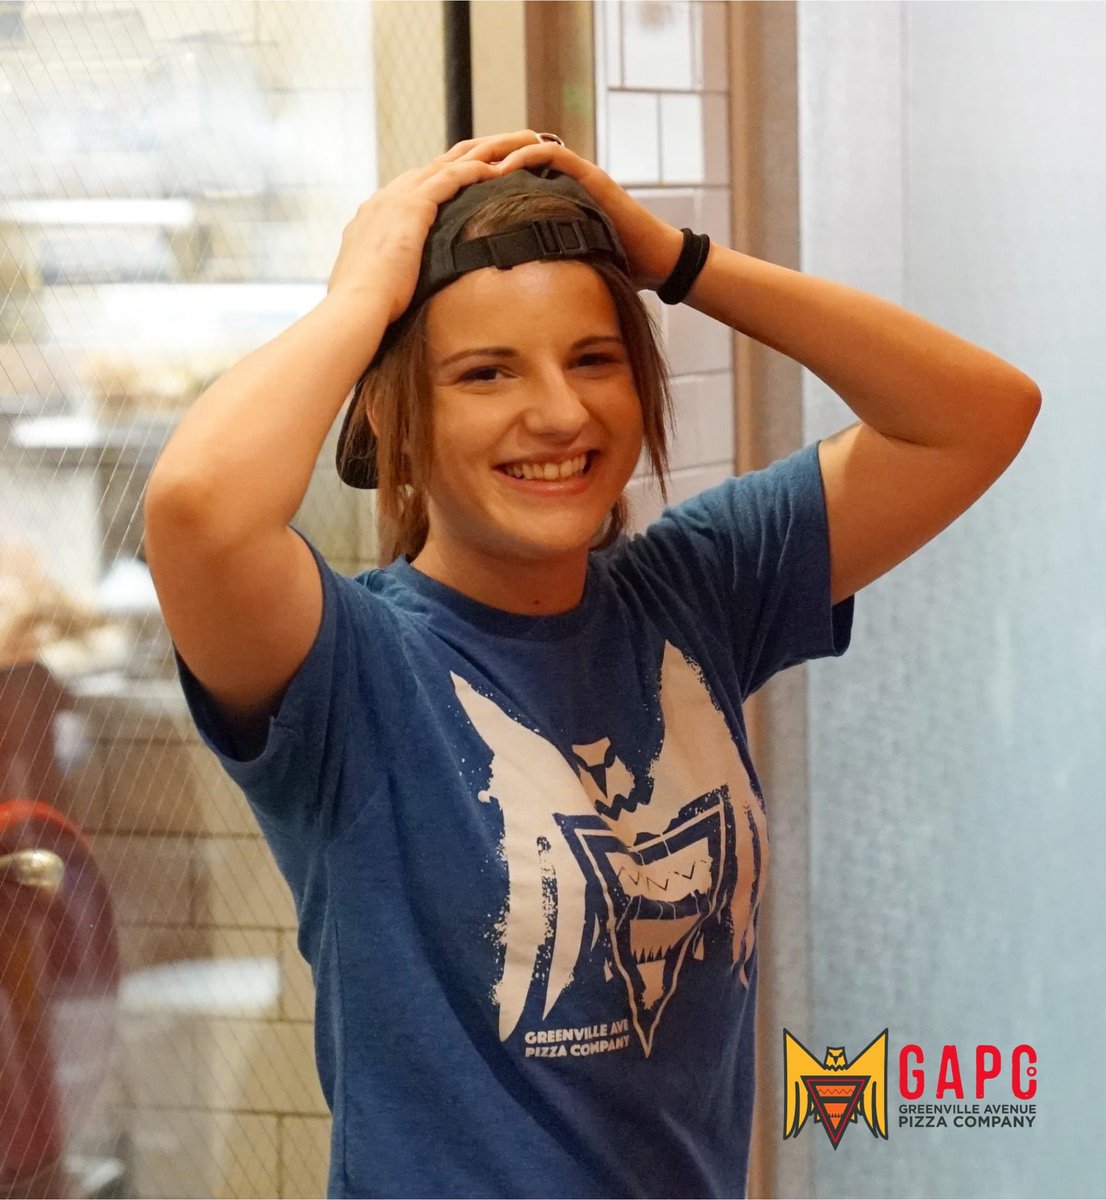 📆Today is the first day of May which is #MentalHealthAwarnessMonth! 😄
🍕Whether you're on our team, or a guest at #GAPCo, your happiness matters and we love to see you smile! Check on your friends, and reach out to one if you are struggling. We are all in this together! ❤️